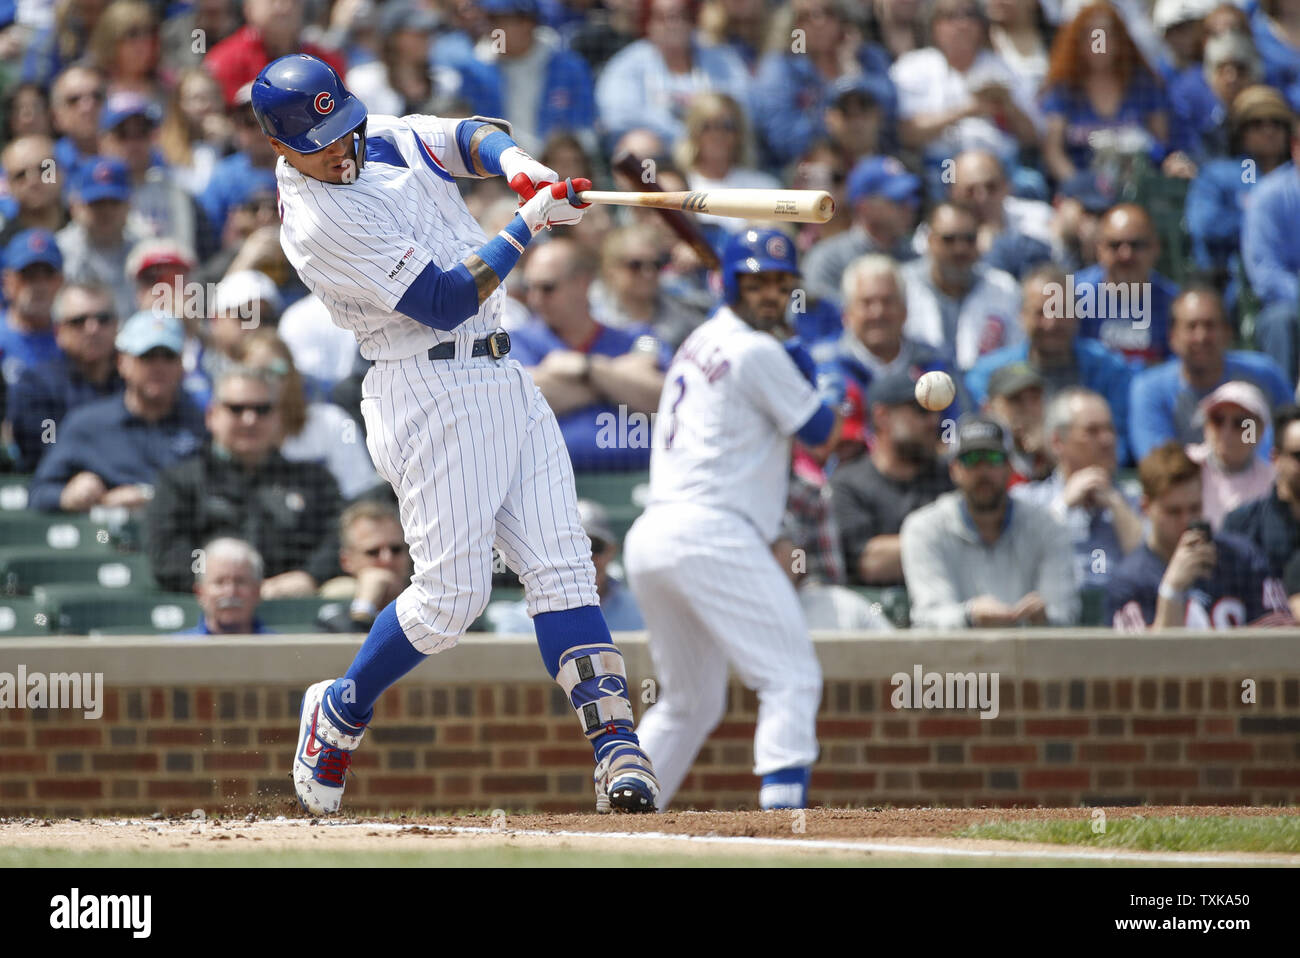 Chicago Cubs shortstop Javier Baez singles against the Los Angeles Dodgers in the first inning at Wrigley Field on April 25, 2019 in Chicago. Photo by Kamil Krzaczynski/UPI Stock Photo